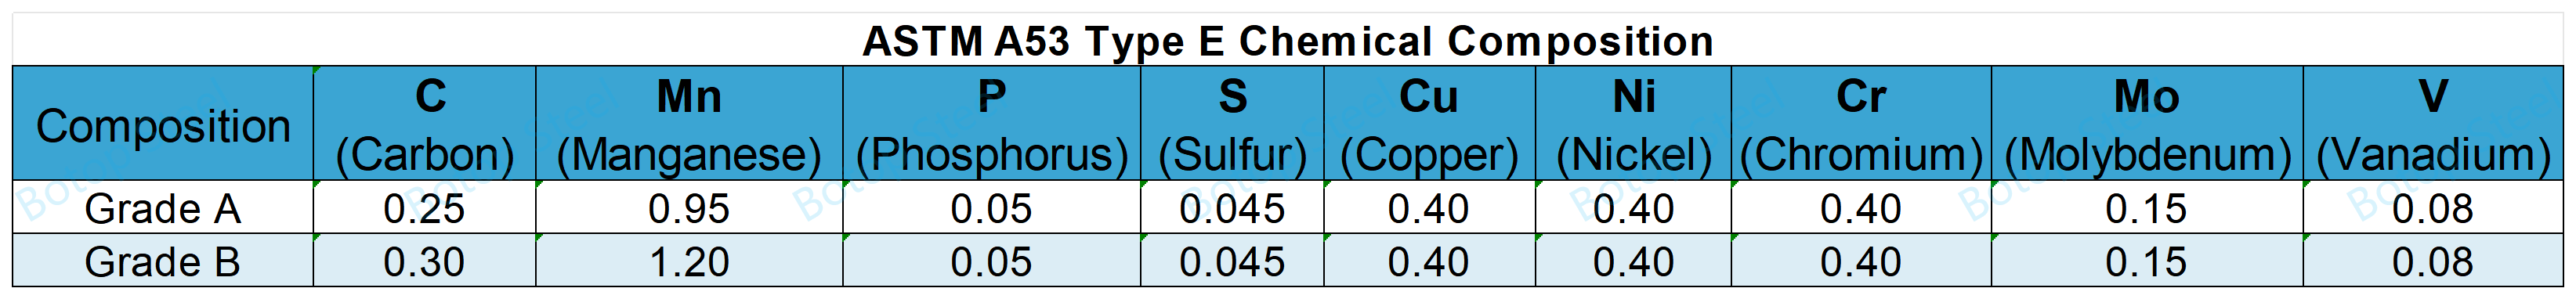 ASTM A53 Type E Chemical Composition